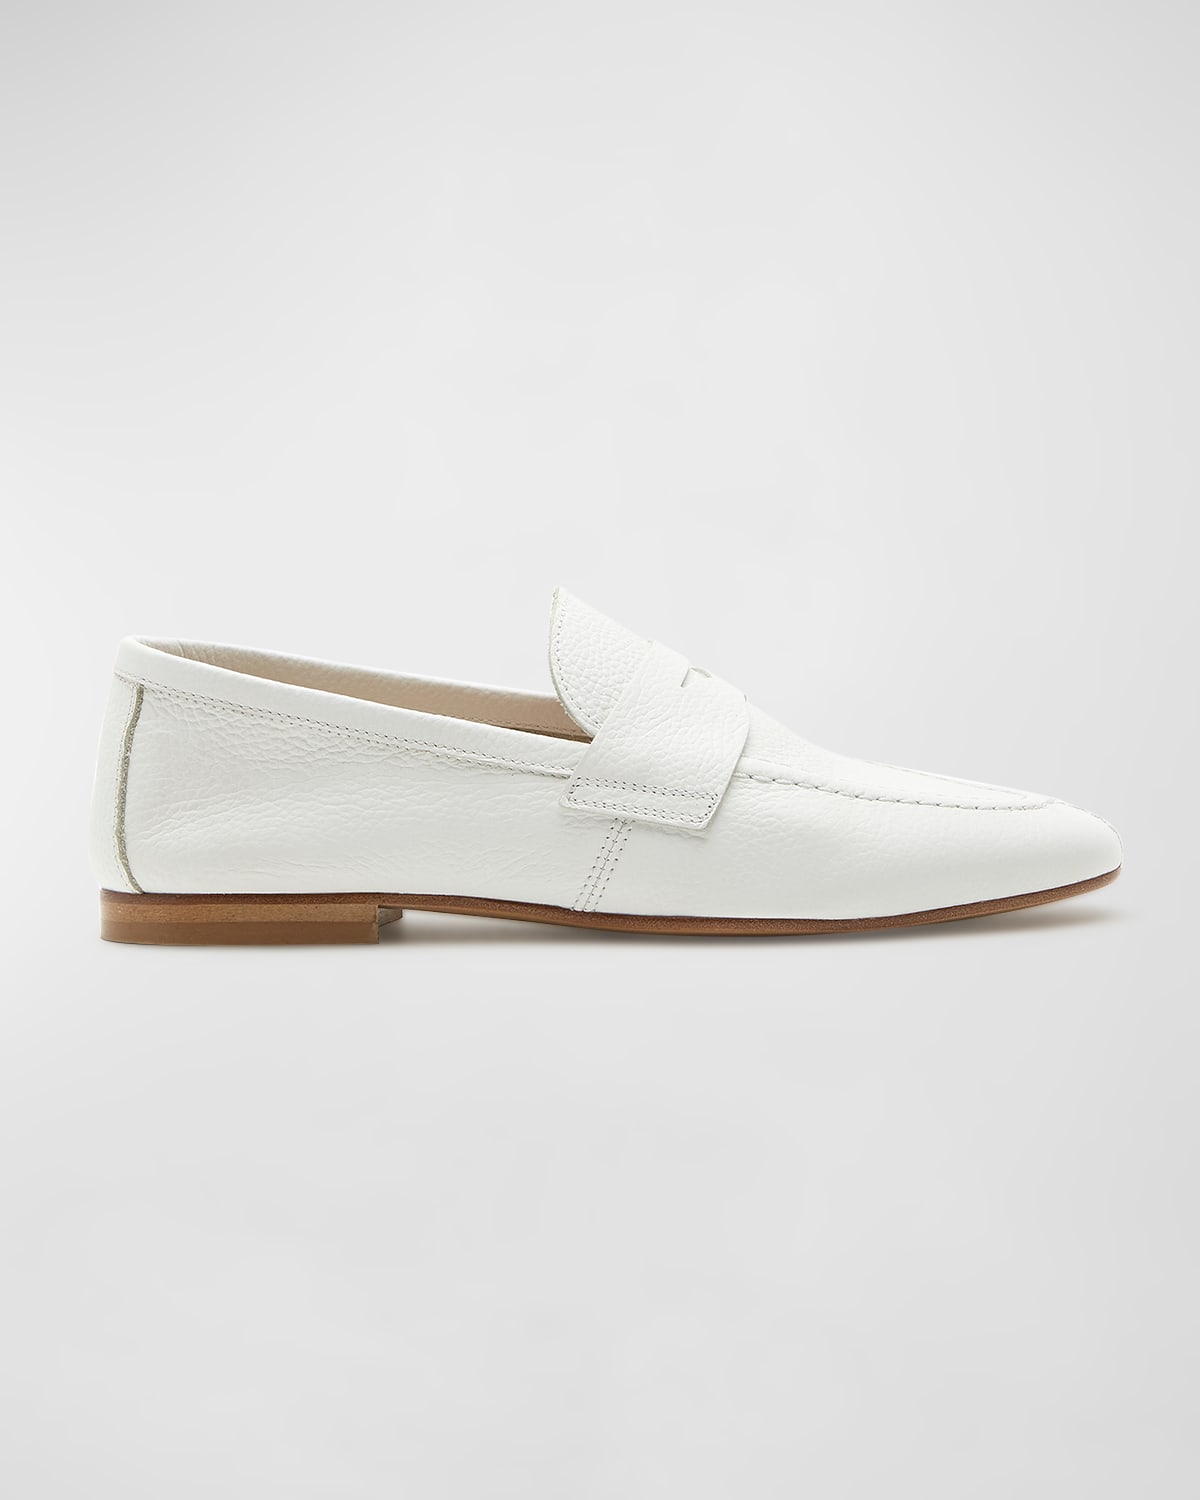 LA CANADIENNE BAZ LEATHER PENNY LOAFERS